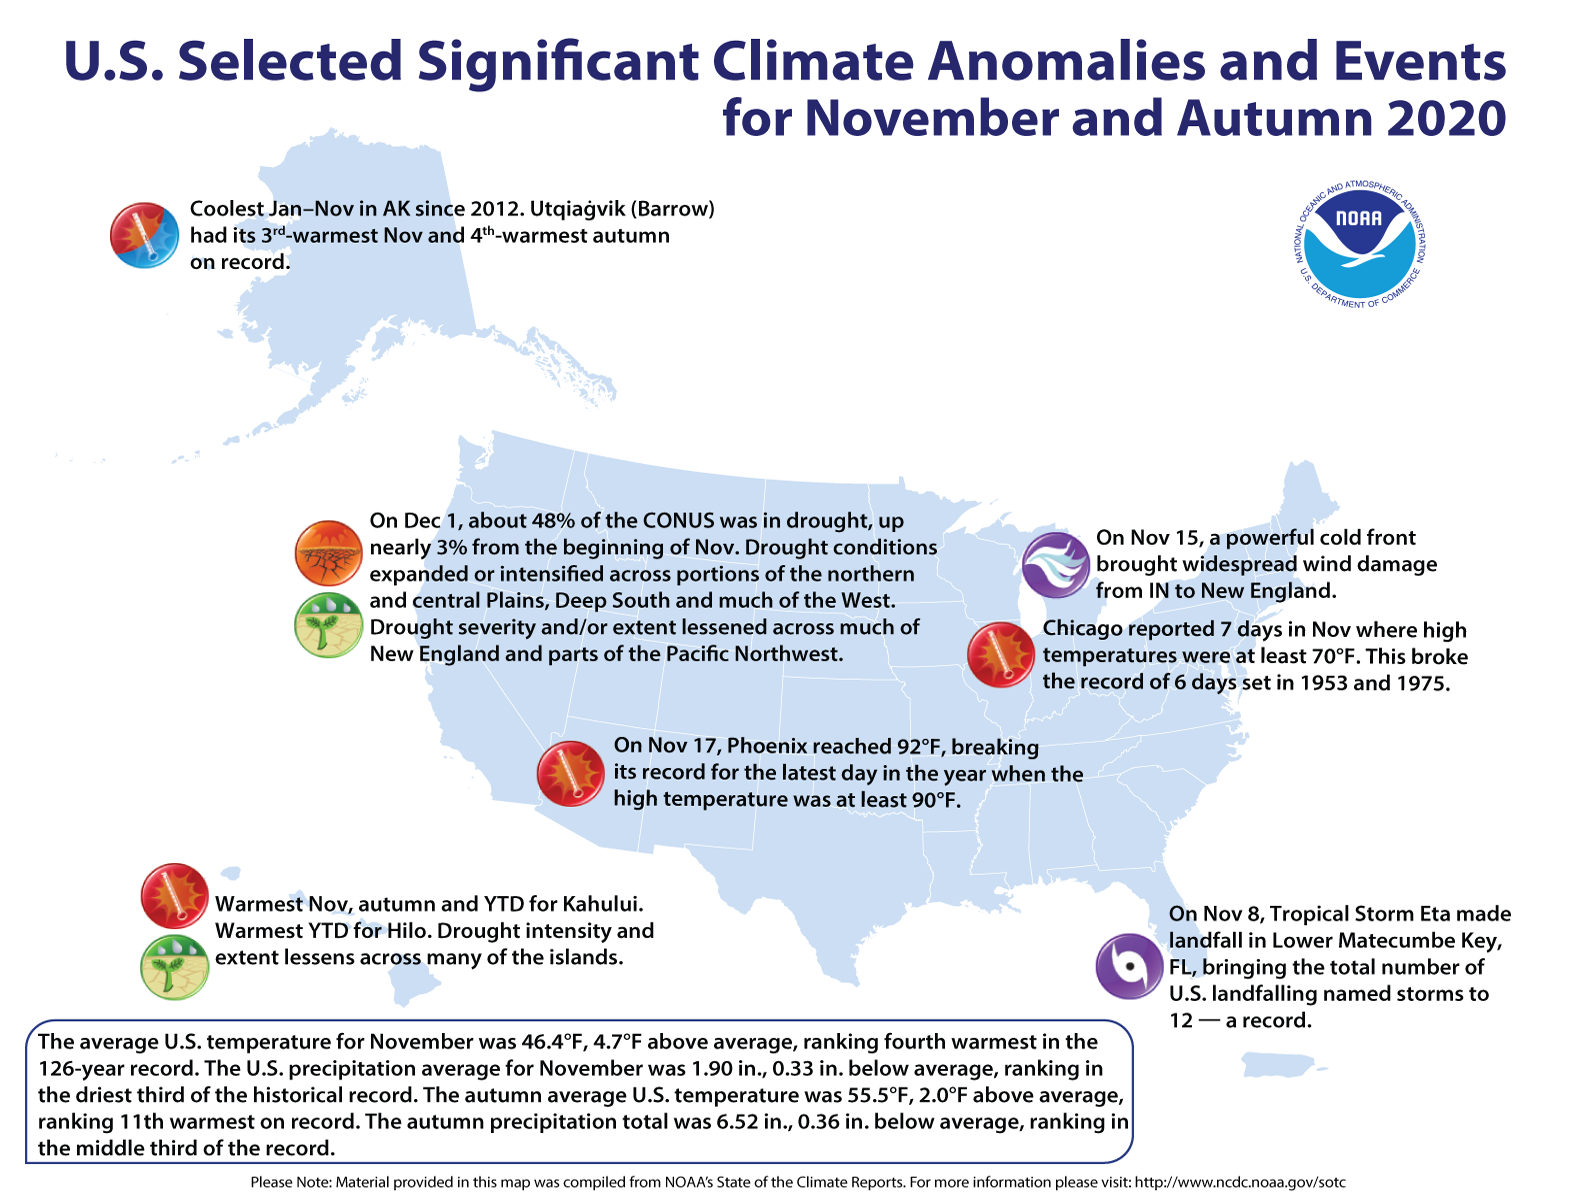 An annotated map of the United States showing notable climate and weather events that occurred across the country during November and Autumn 2020. For text details, please visit http://bit.ly/USClimate202011.